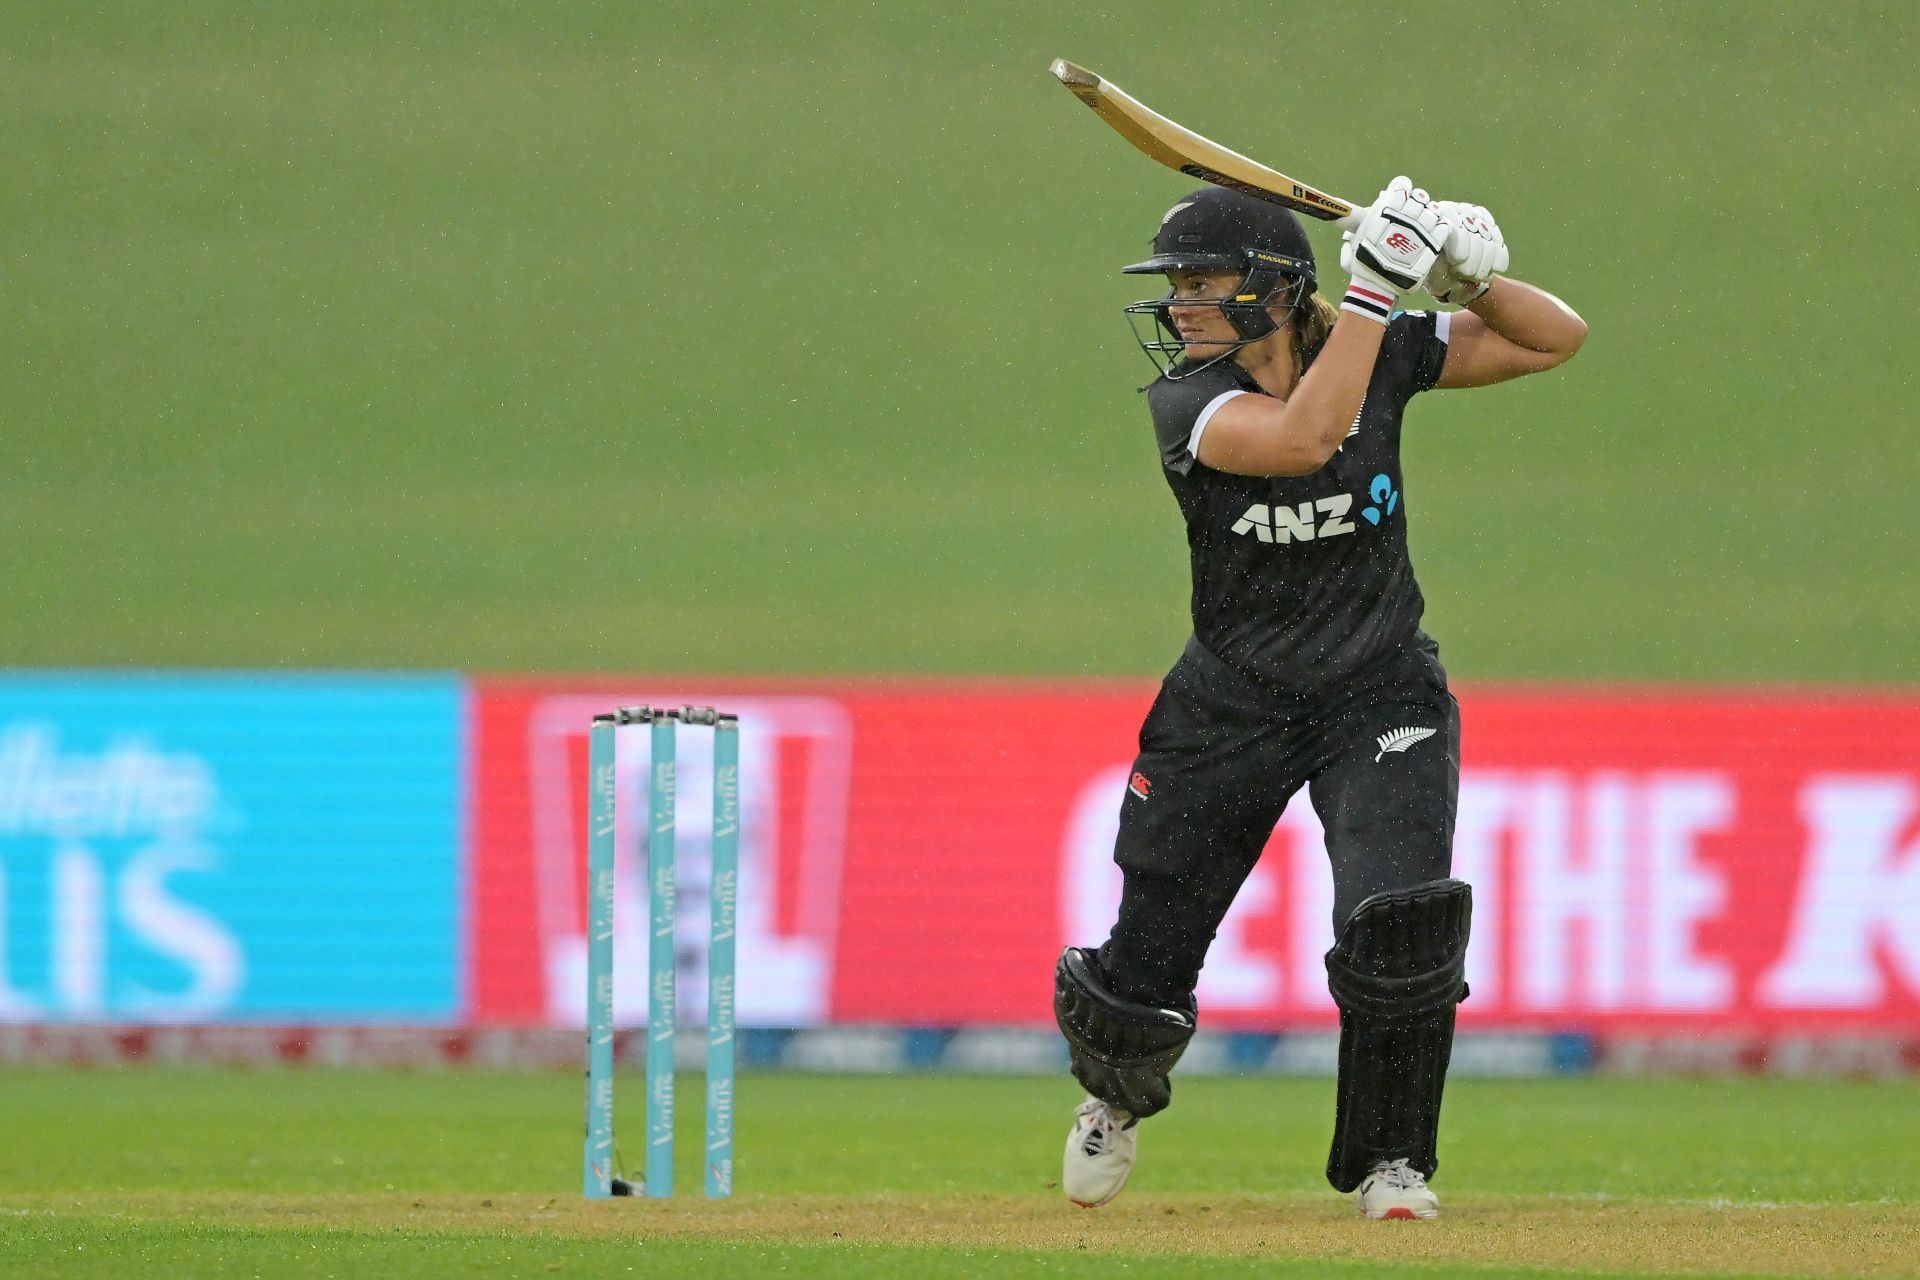 The top ranked T20I batter, Suzie Bates was unfortunate to miss out on a gig